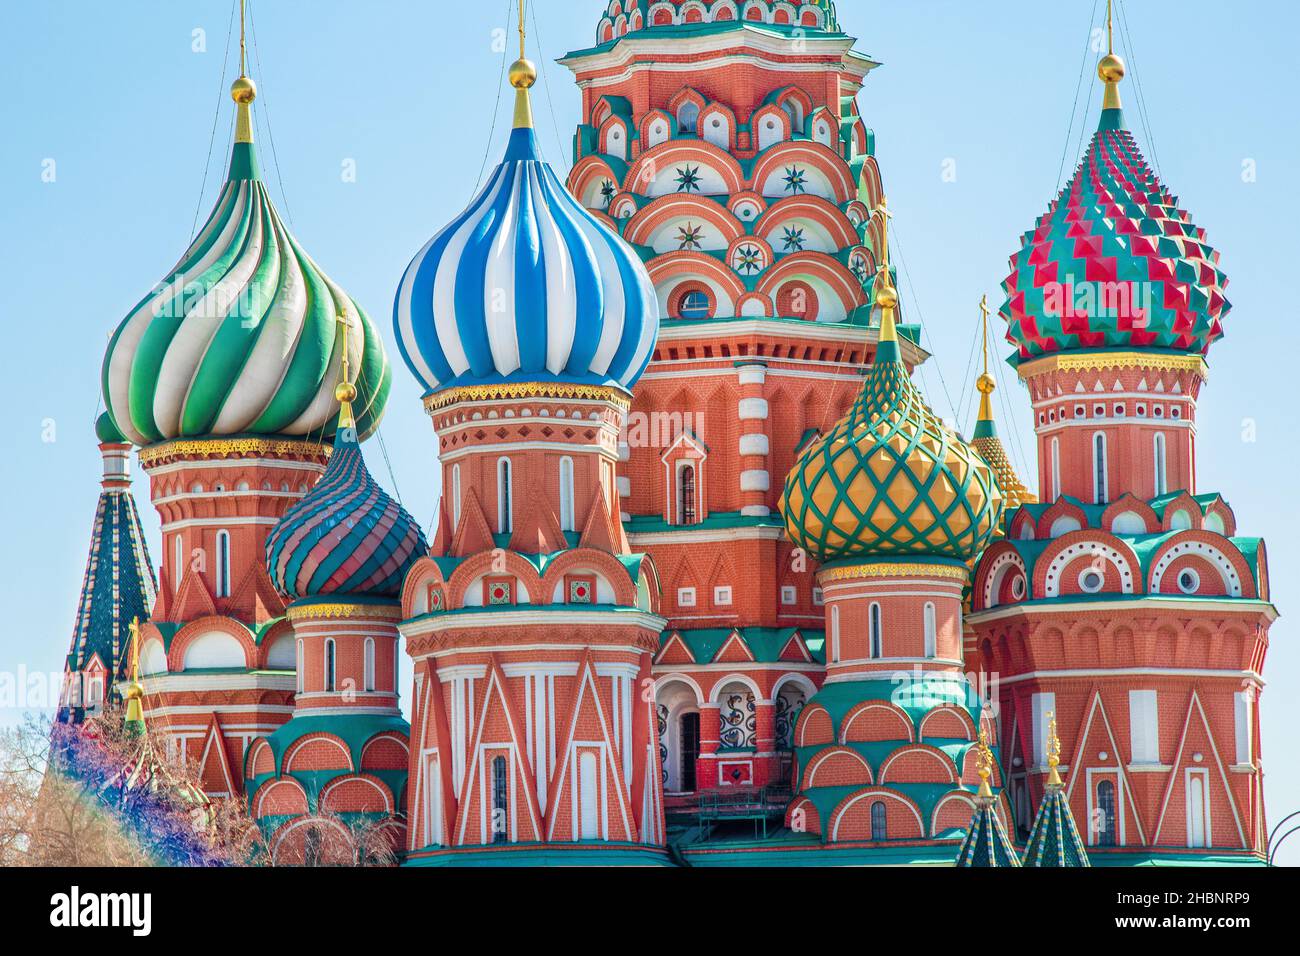 The many colourful domes of St Basils Cathedral in Red Square, one of the oldest and largest squares in Moscow, the capital of Russia. Stock Photo